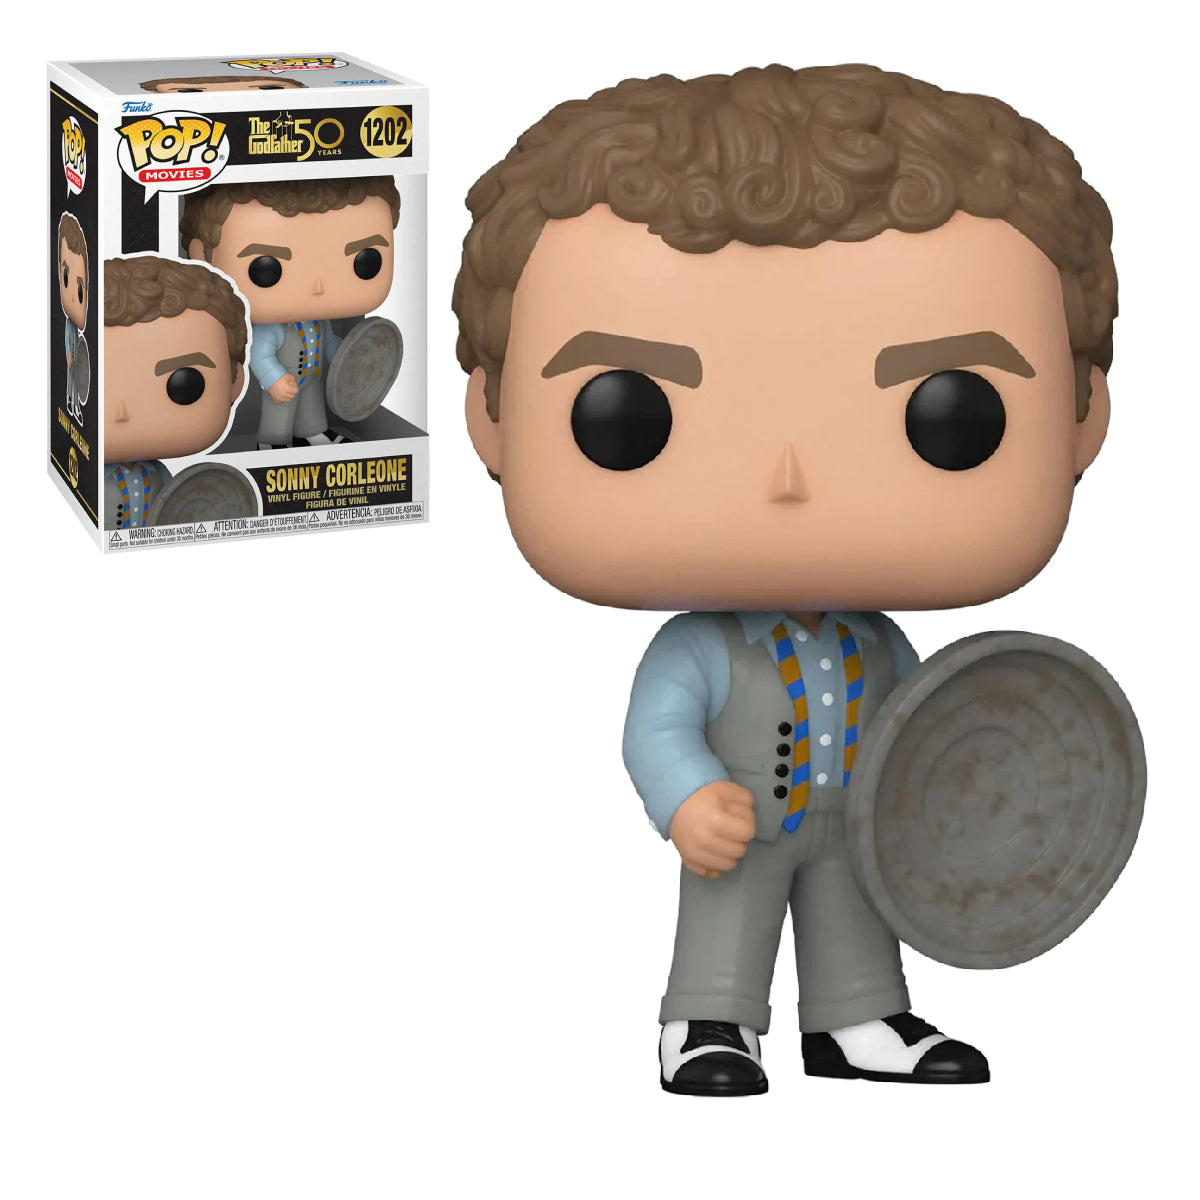 FUNKO POP MOVIES THE GODFATHER 50TH SONNY CORLEONE 1202